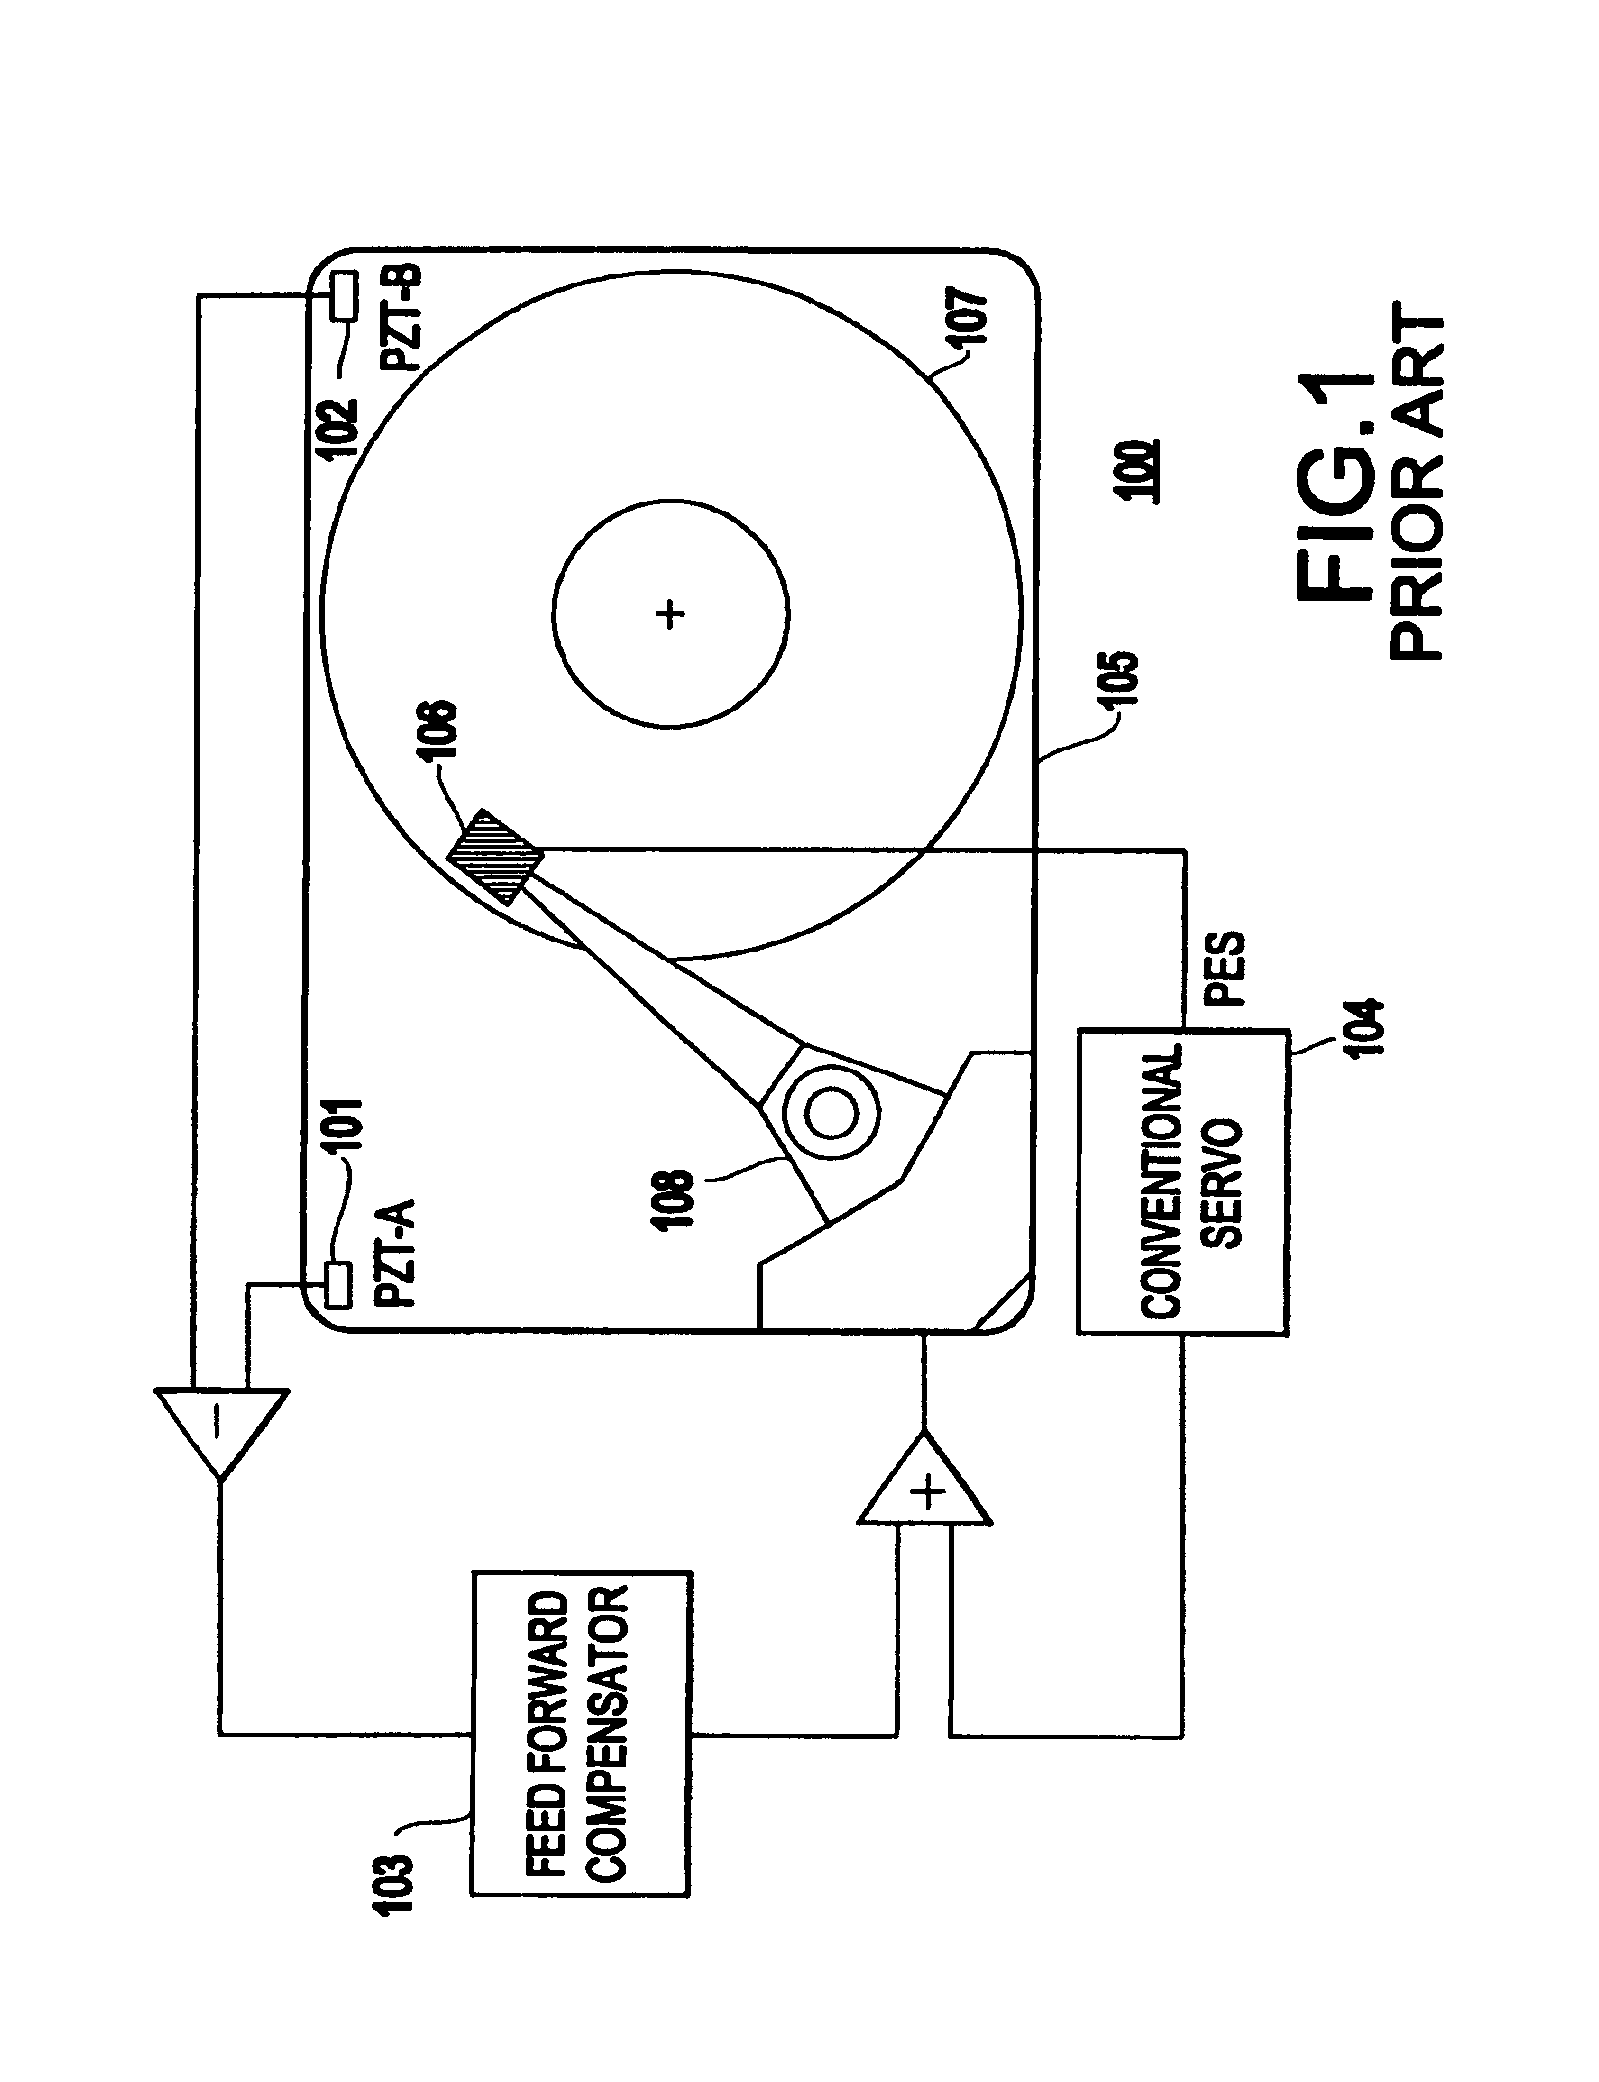 Method and system for rotational velocity-based algorithm for vibration compensation in disk drives